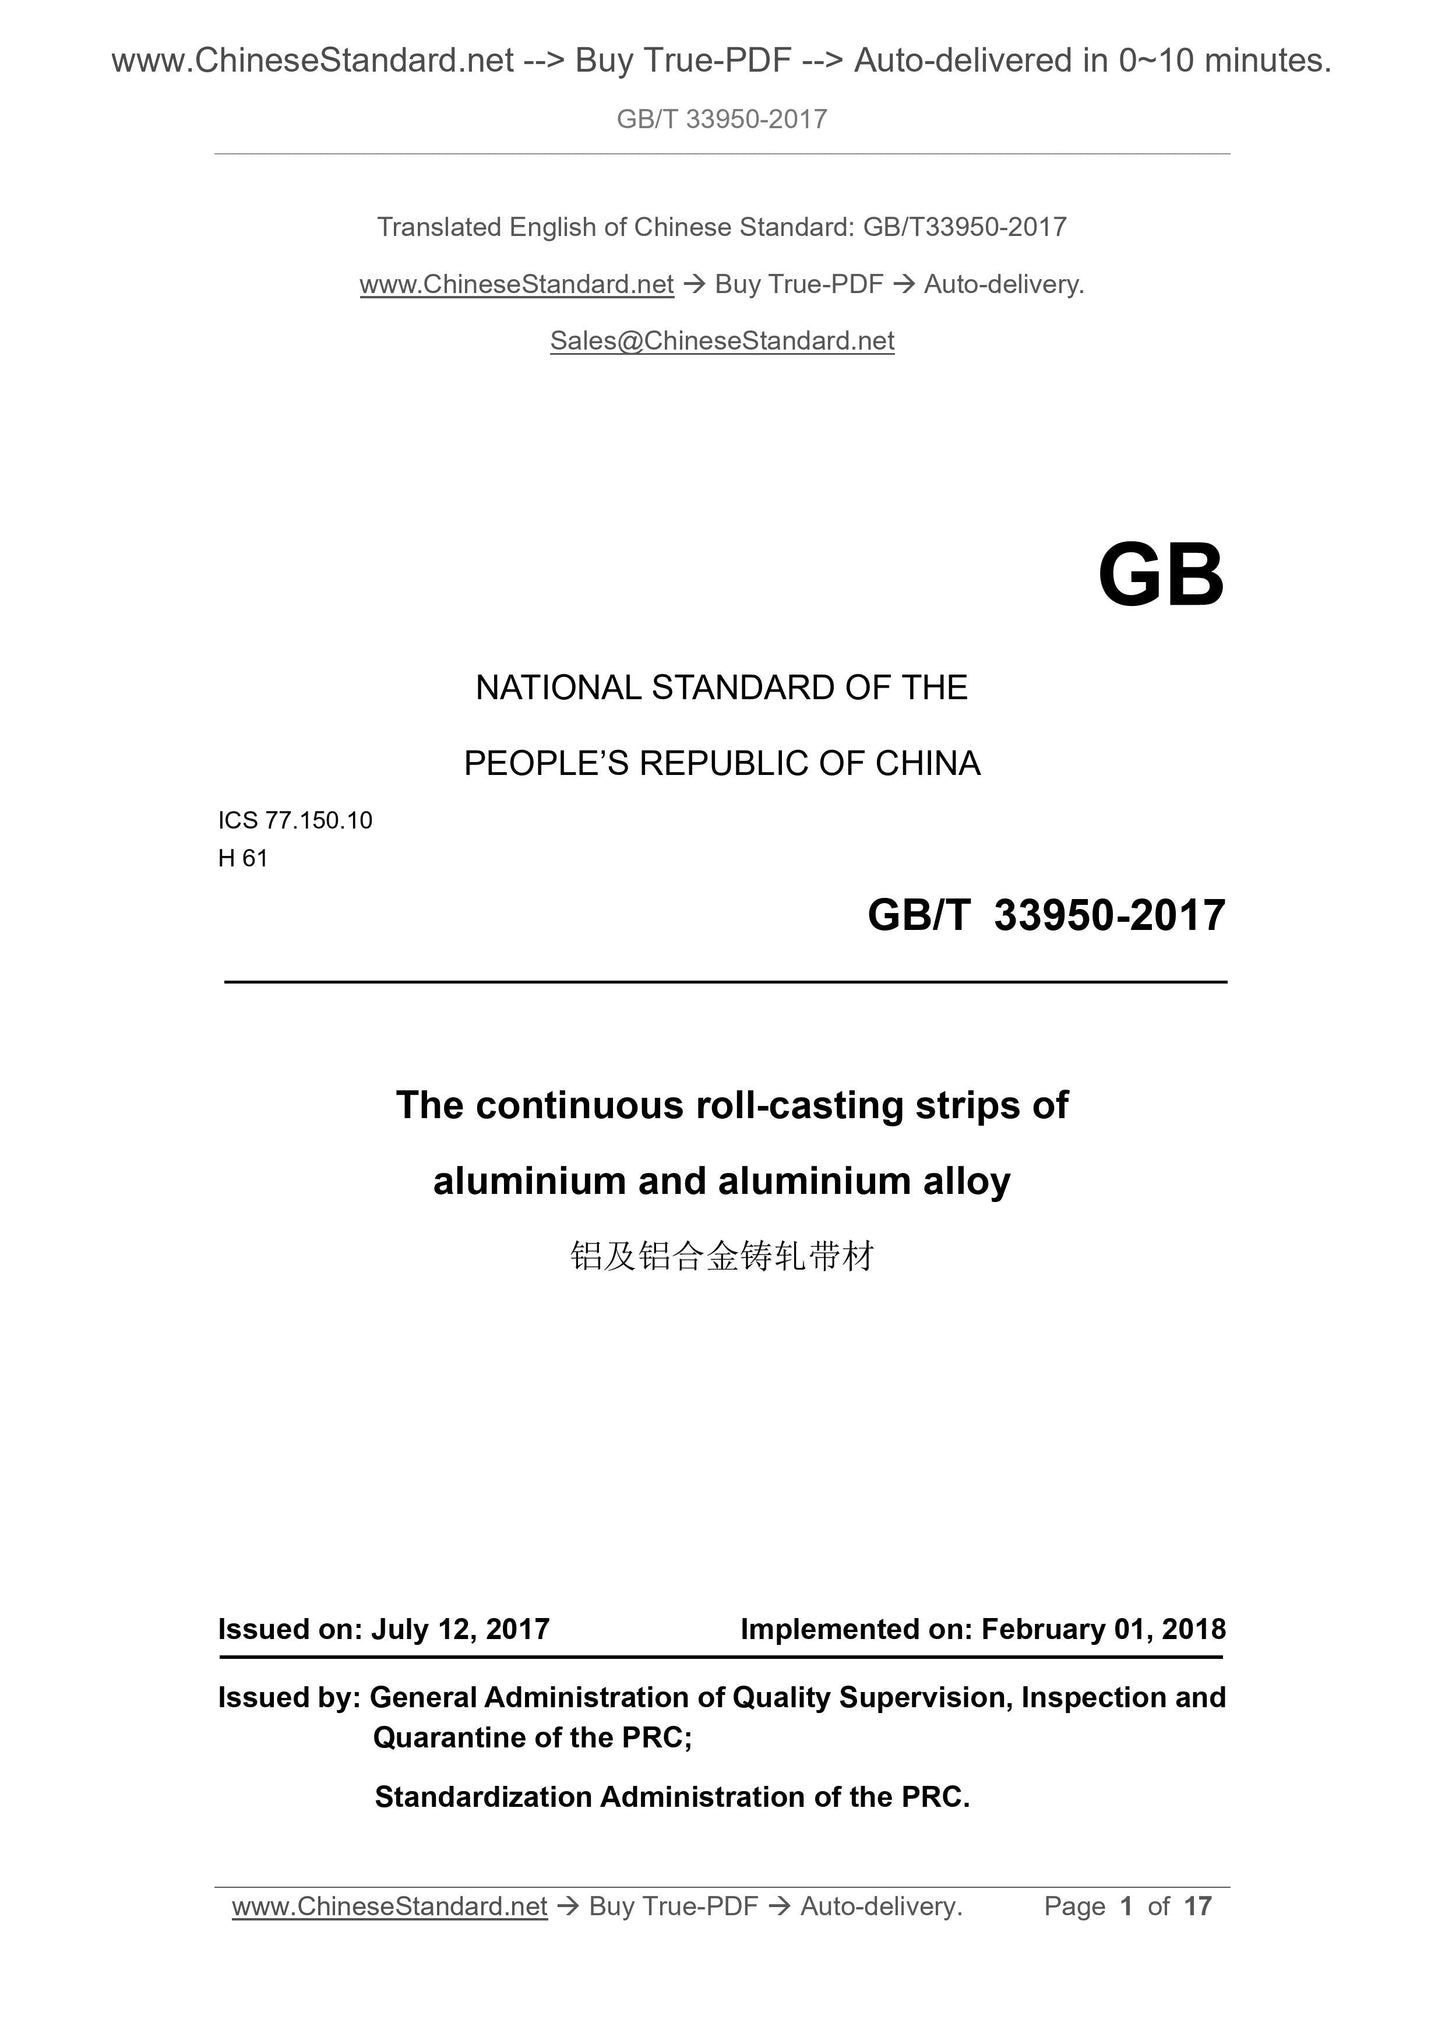 GB/T 33950-2017 Page 1